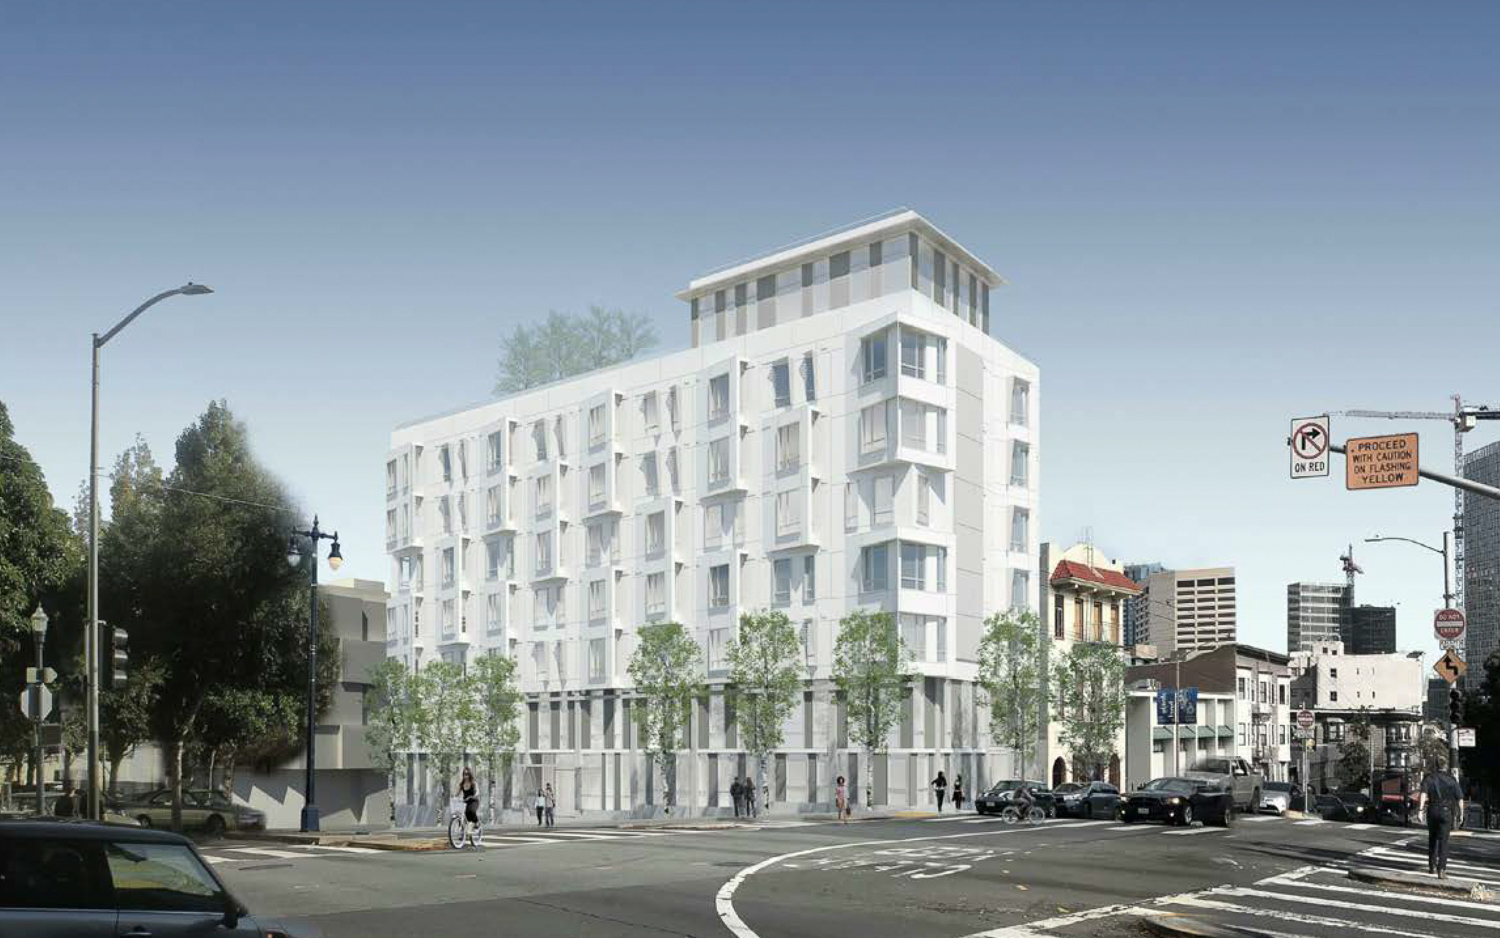 78 Haight Street, rendering by Paulett Taggart Architects